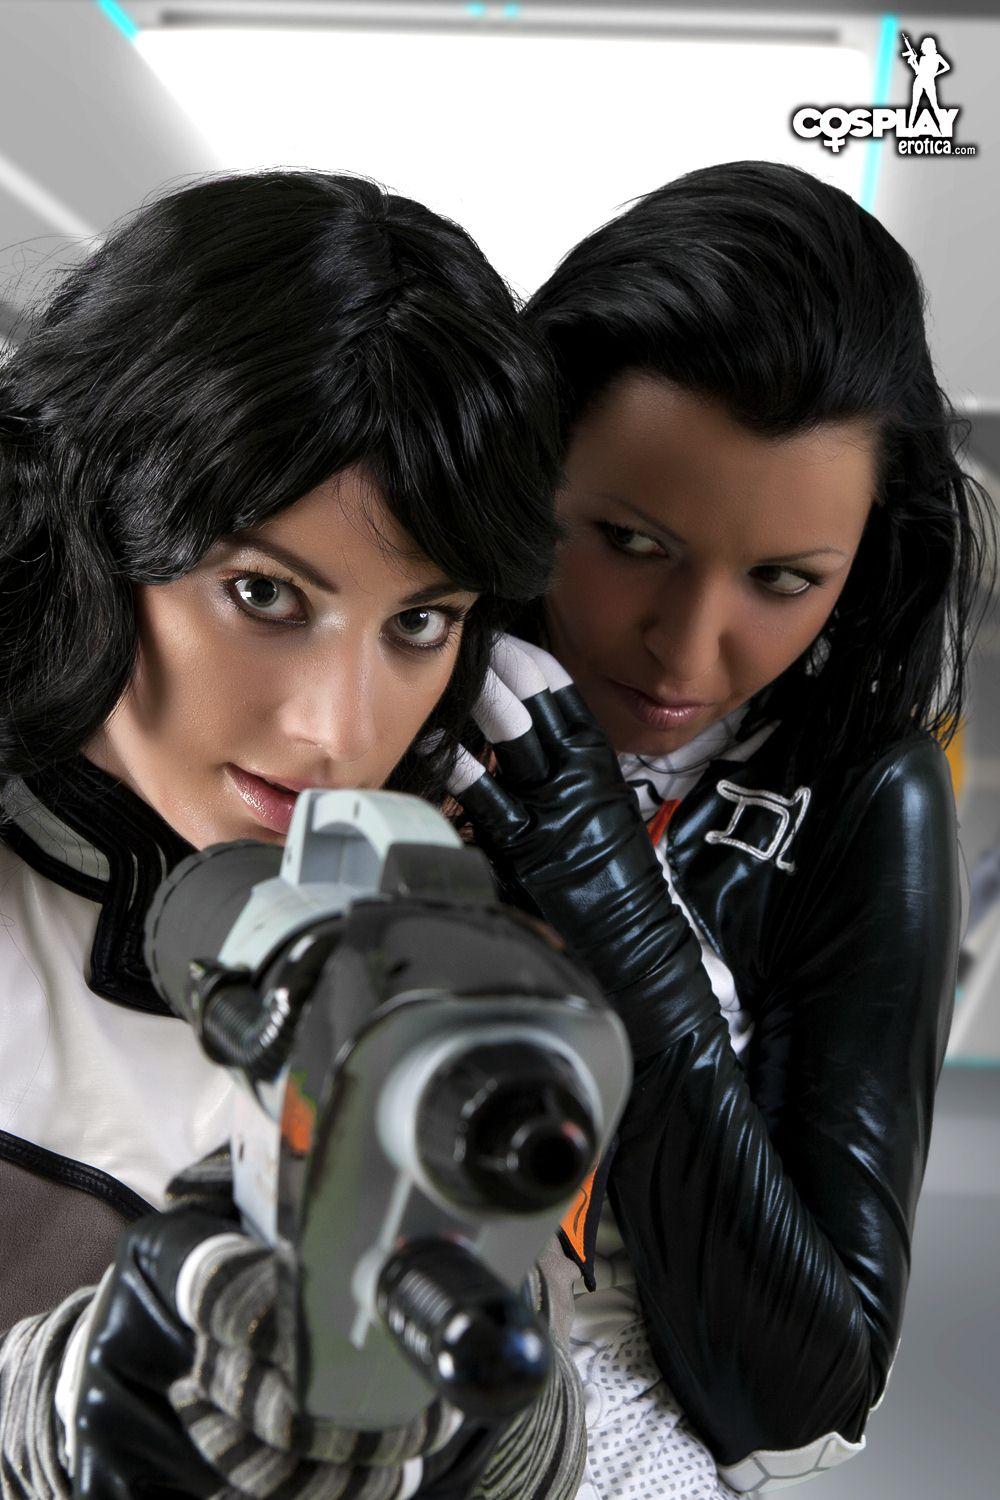 Pictures of Mea Lee and Marylin doing some hot Mass Effect cosplay #59427831